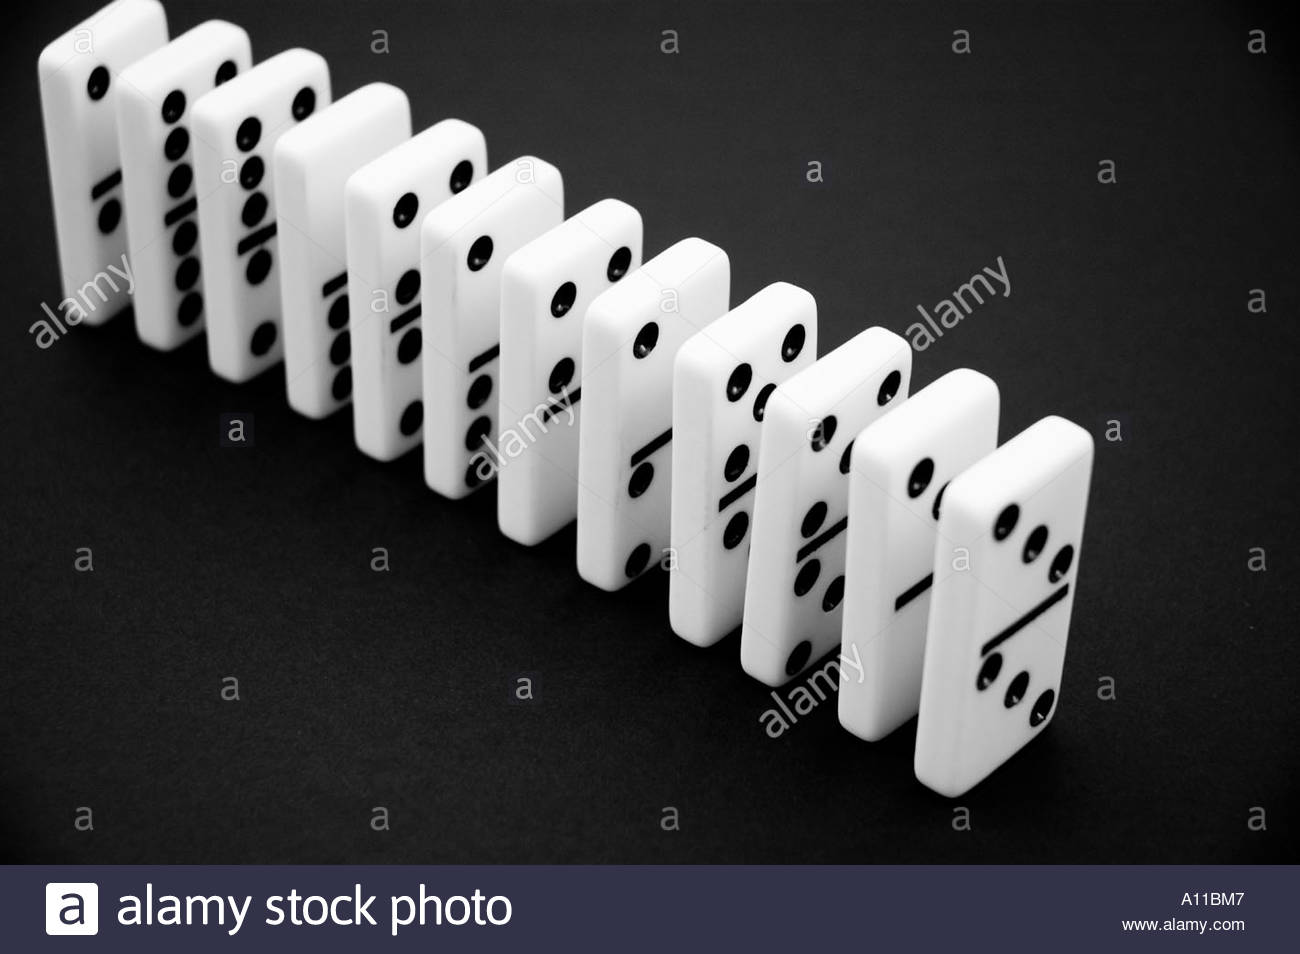 Dominos in a row on a black background Stock Photo 5777798